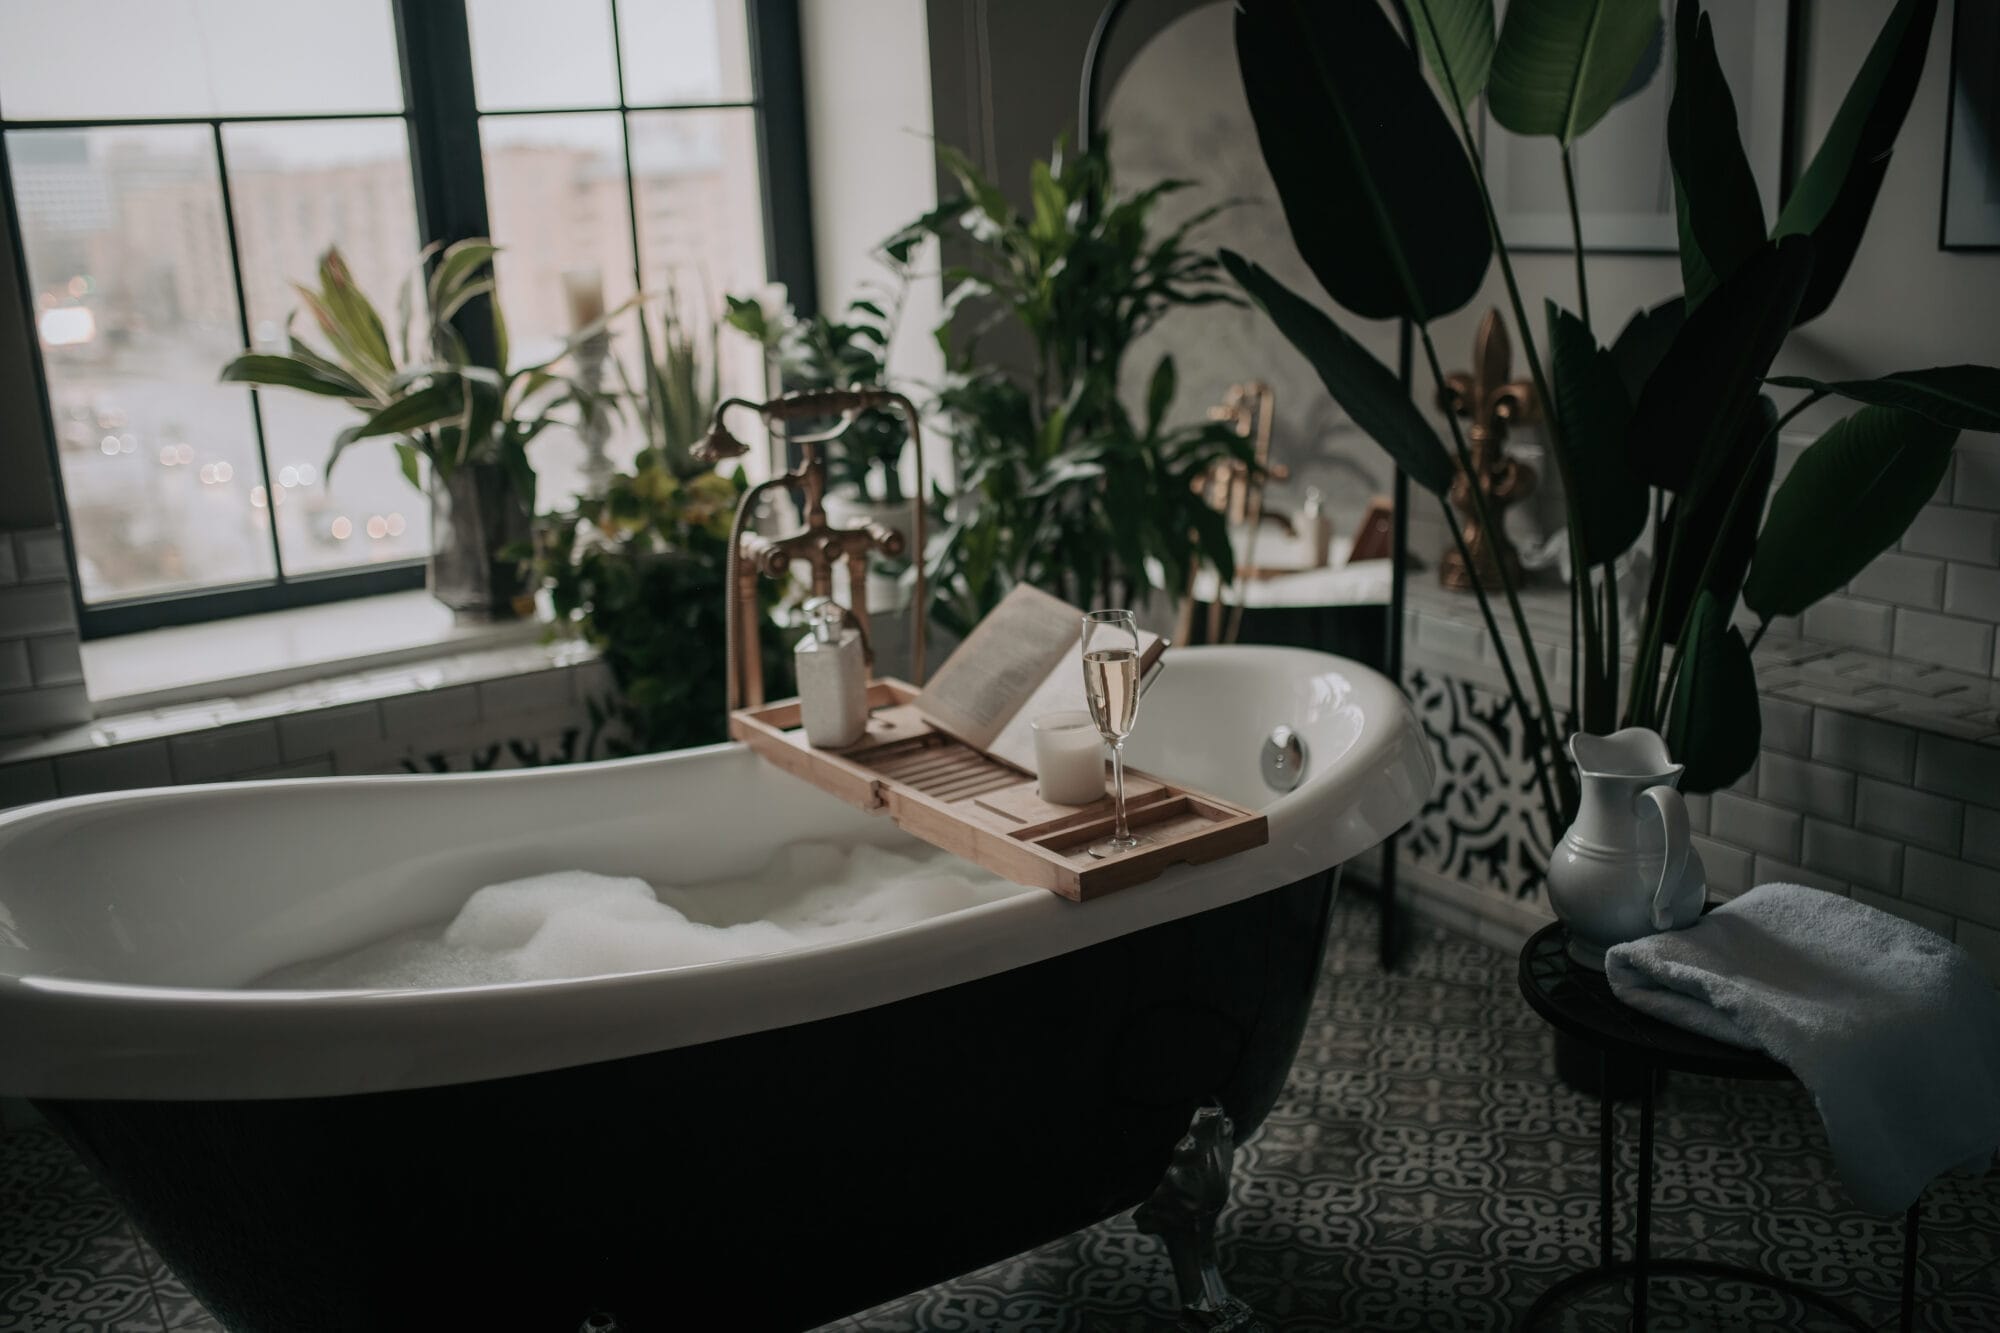 Native hues organic shapes look of bathroom with big window oval bathtub in neutrals earth tones. Green palm plants candles bubblebath leasure and relaxation skin selfcare wellness luxury living